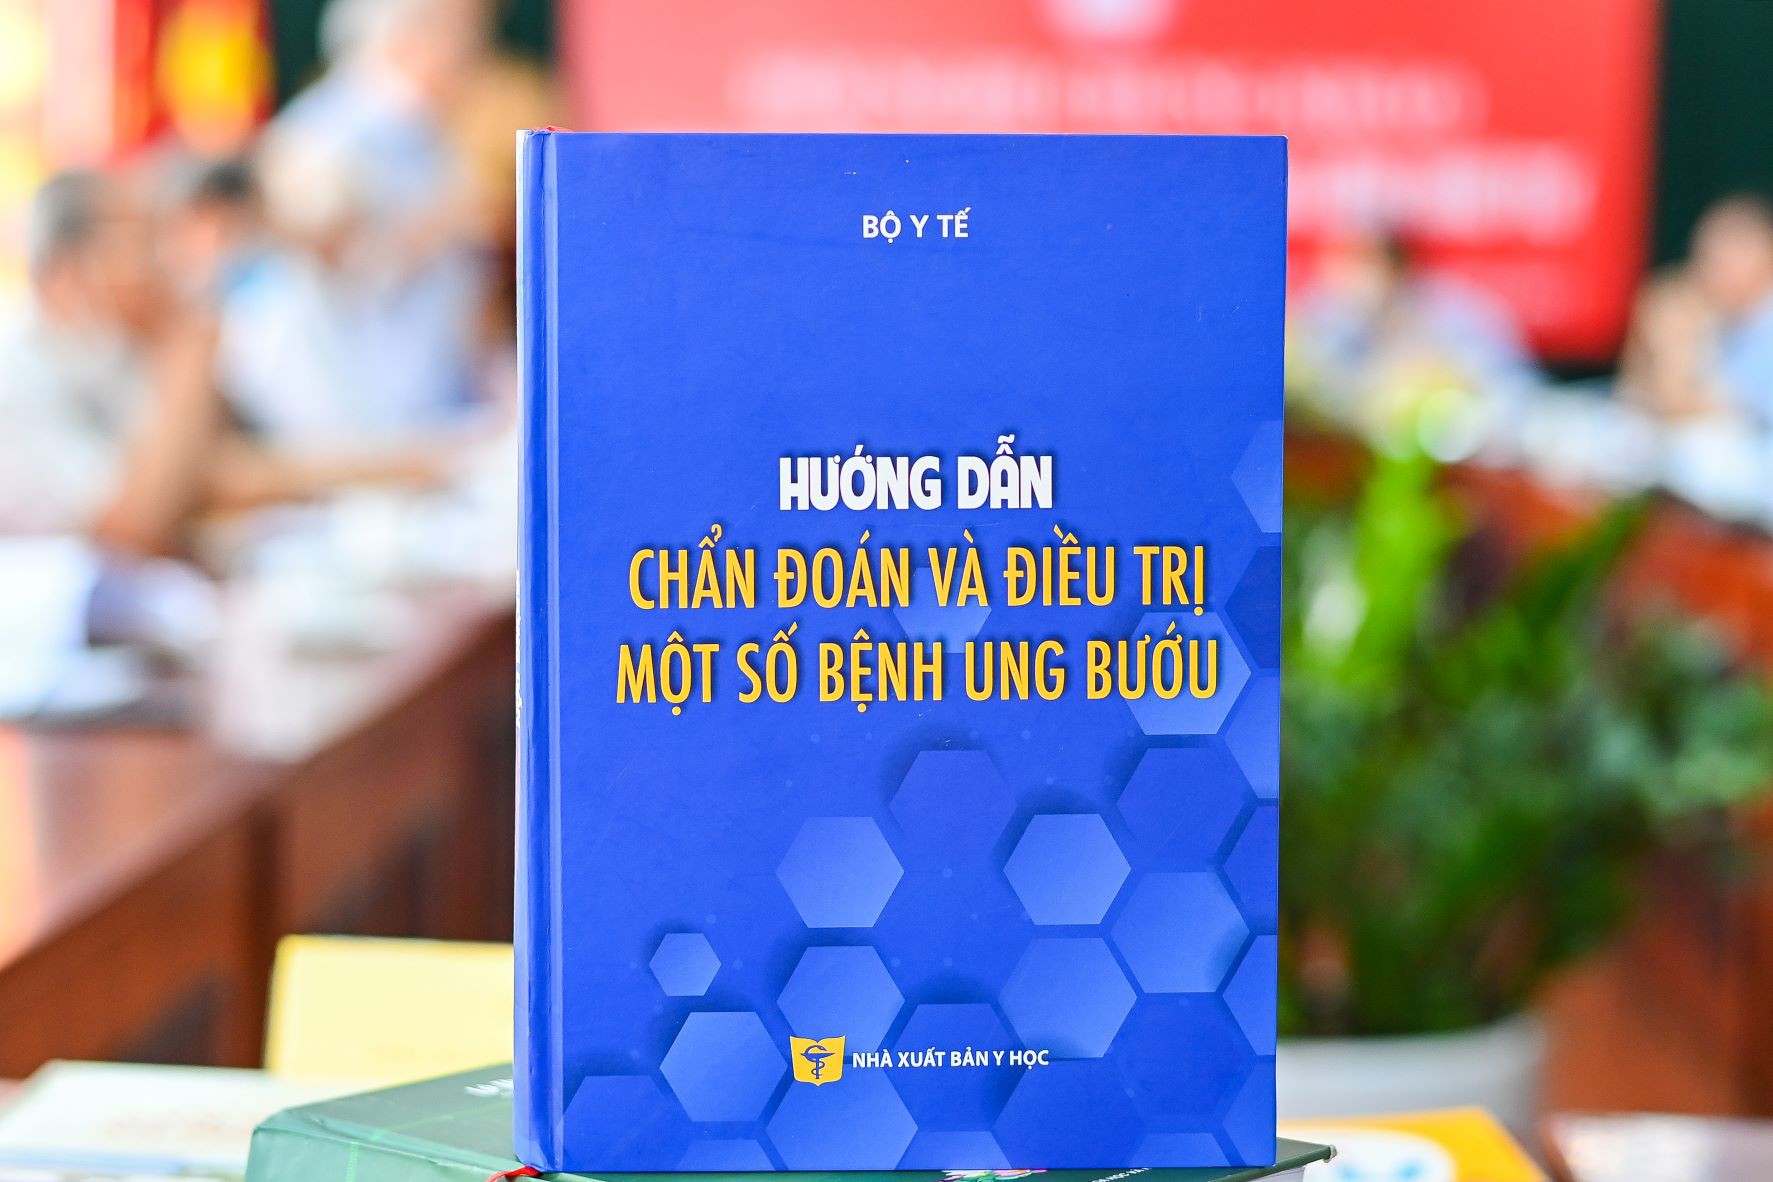 Sach doat Giai thuong Sach quoc gia anh 19